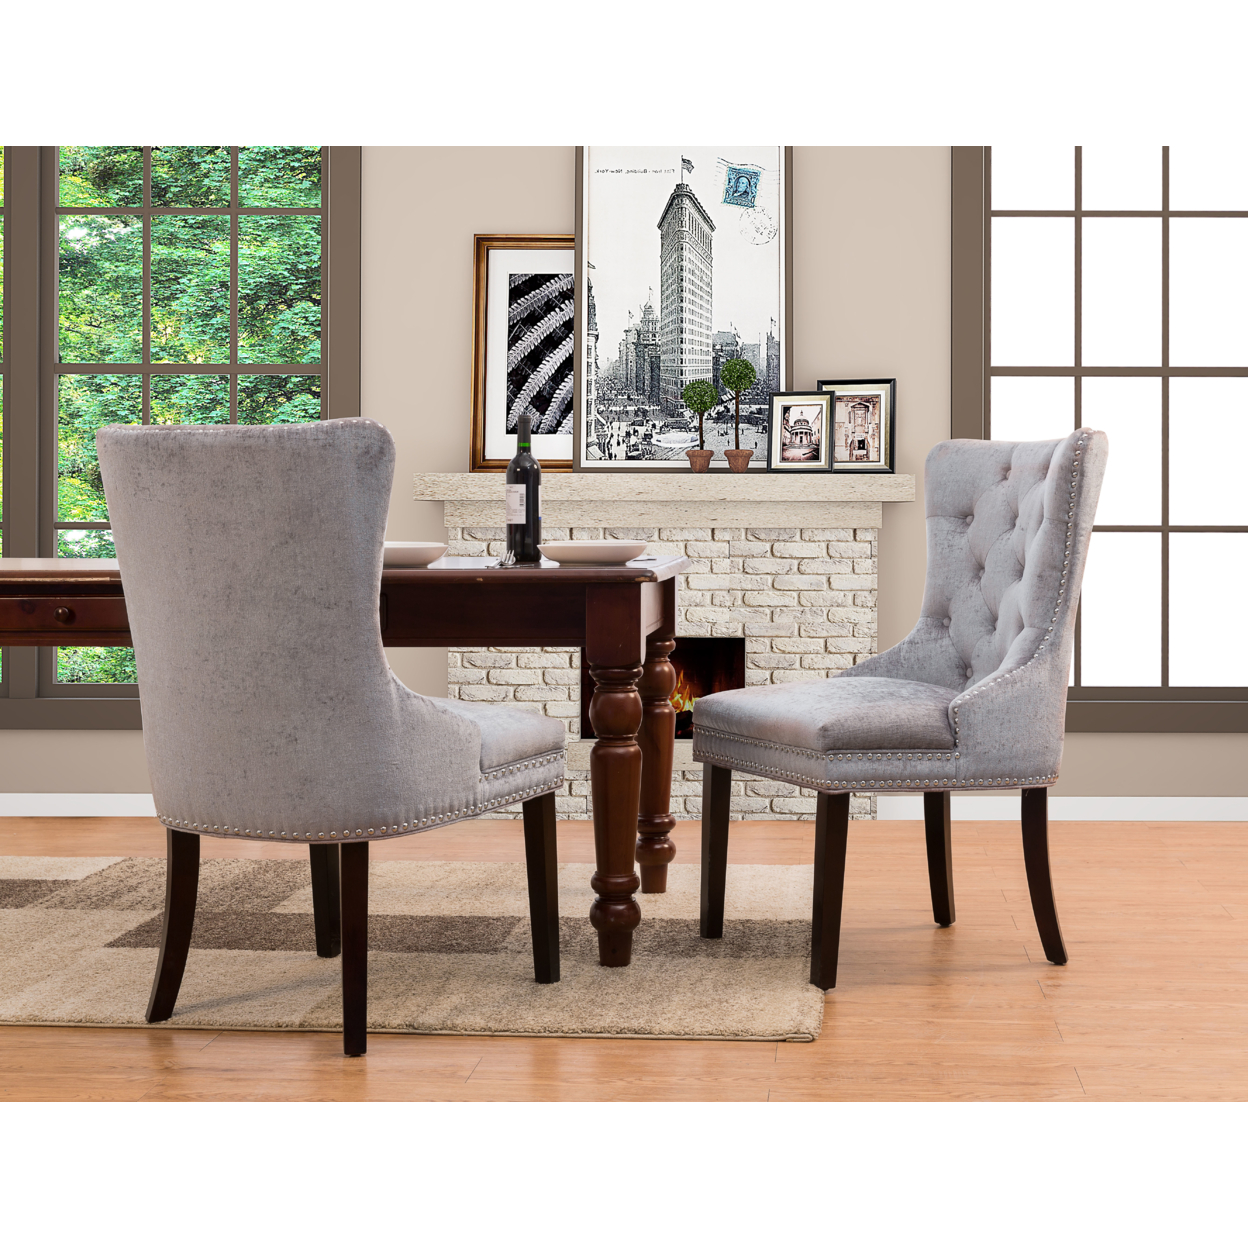 Charlotte Dining Side Accent Chair Button Tufted Velvet Upholstery Espresso Wood Legs, Set Of 2 - Grey